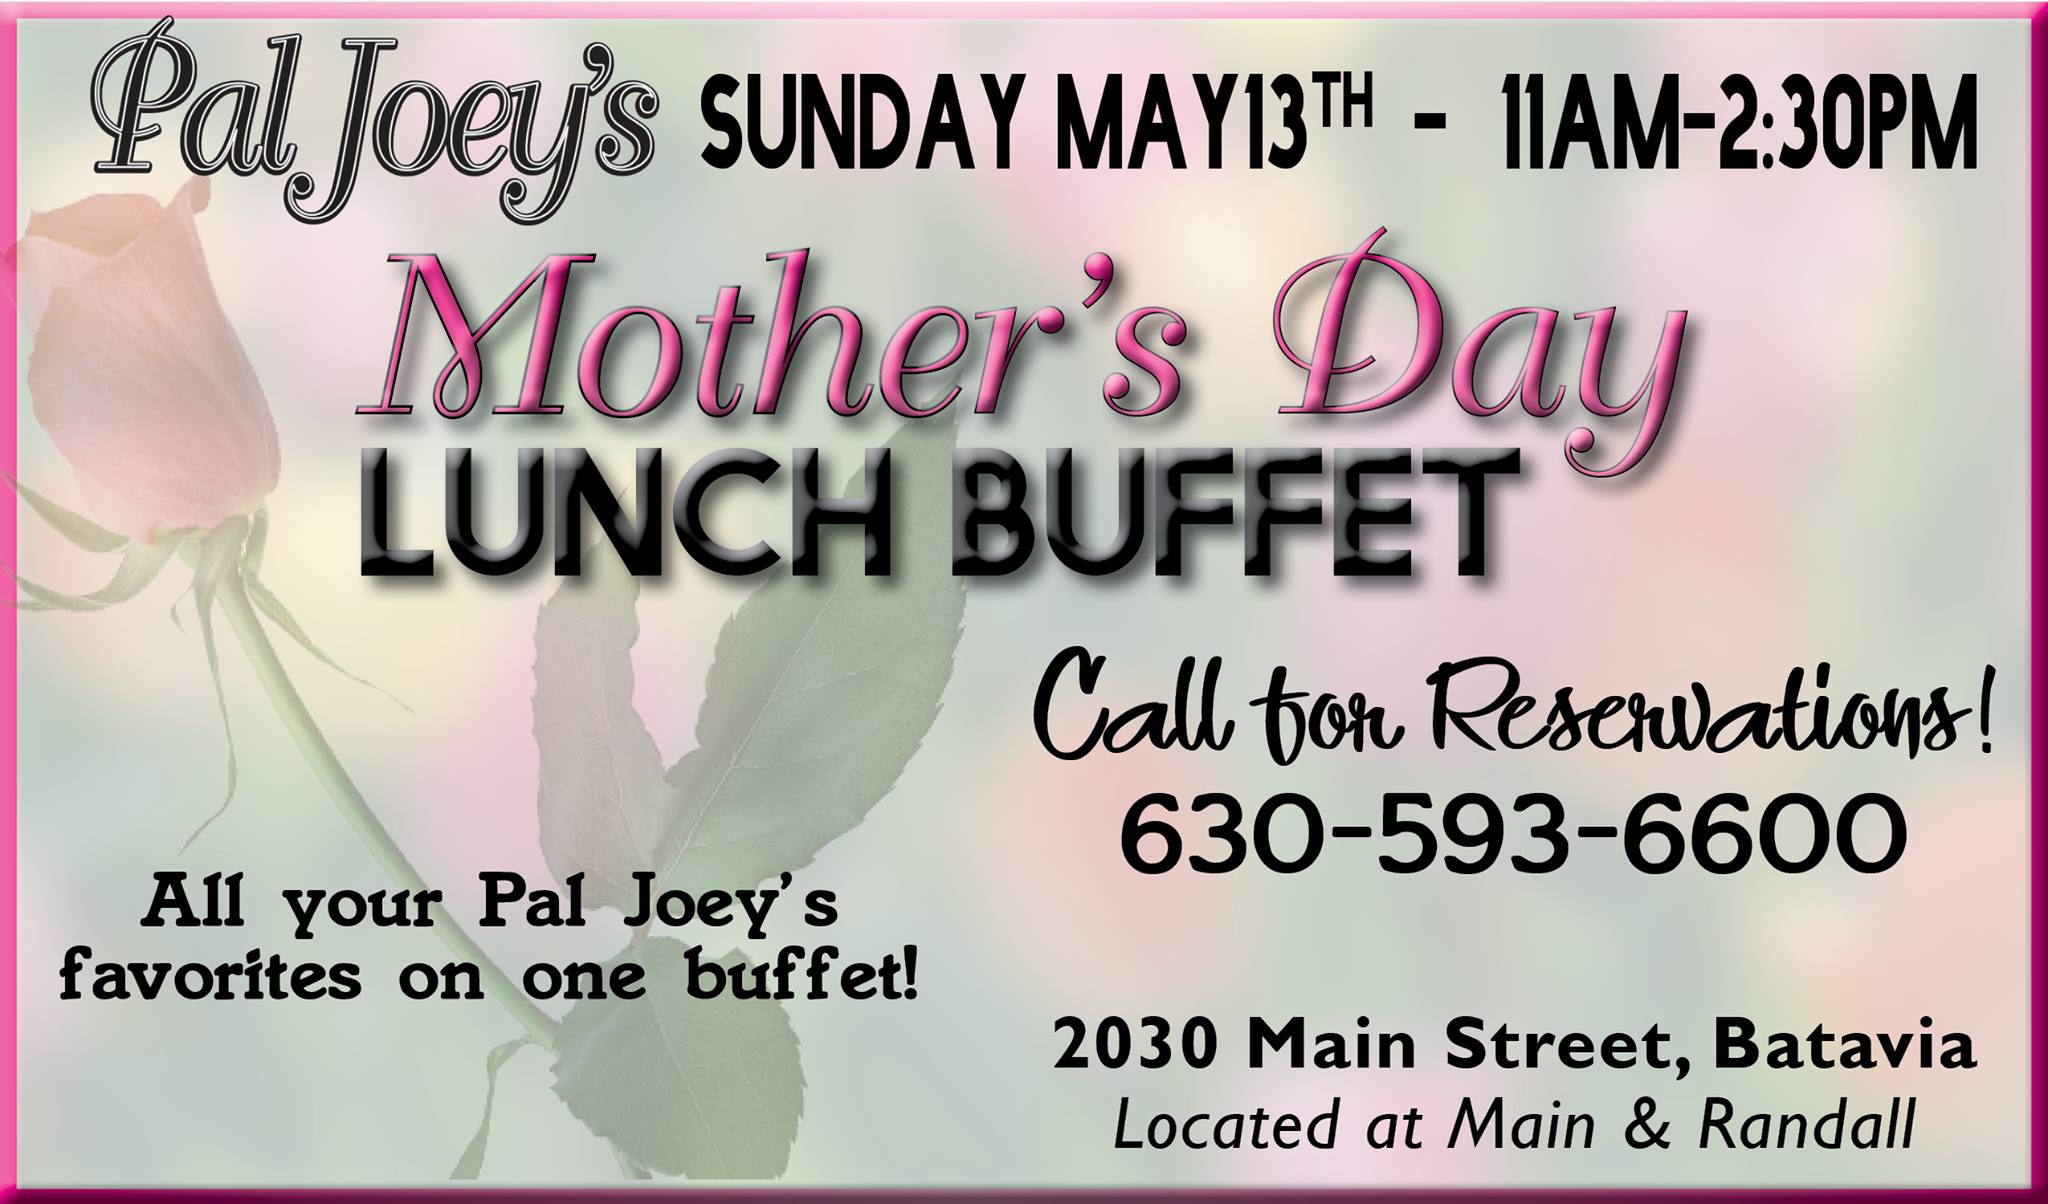 Fox Valley Values Pal Joey S Mother S Day Buffet At Pal Joey S Batavia New Location